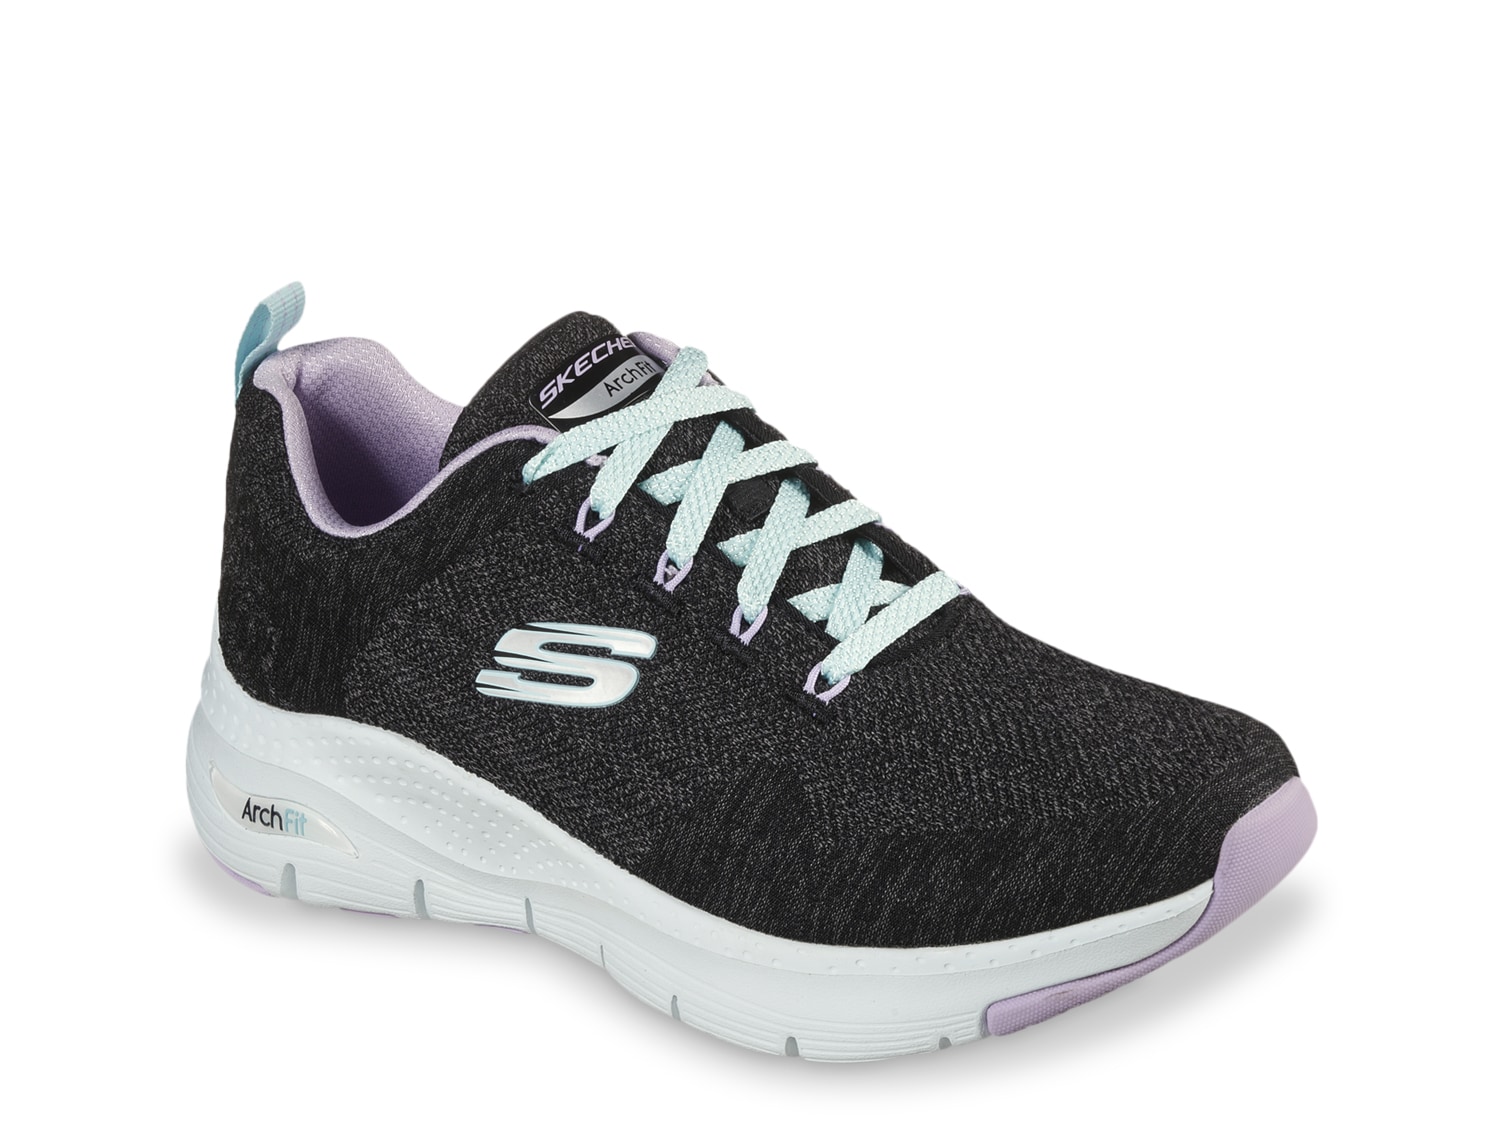 skechers at dsw shoes